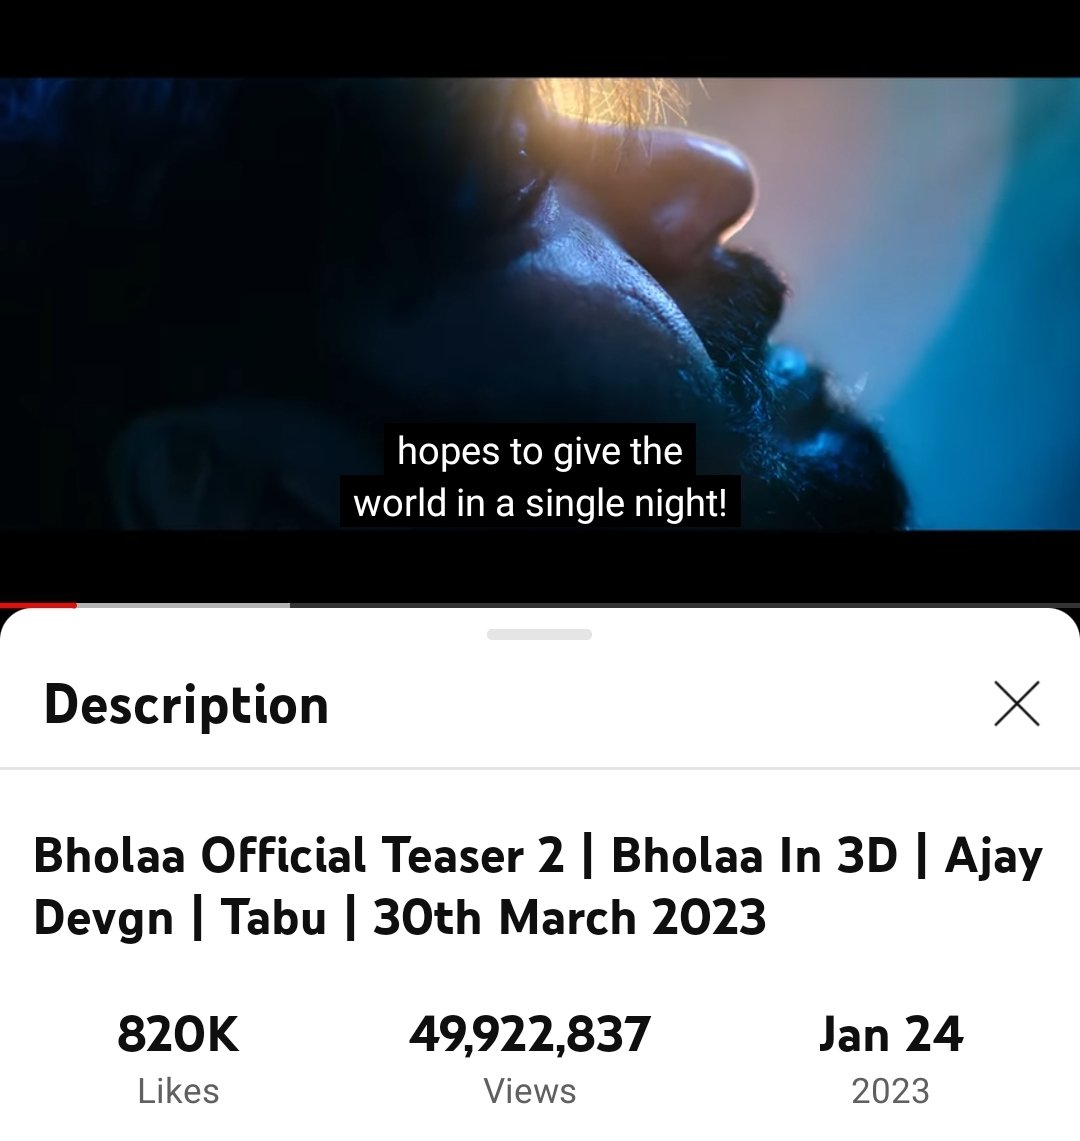 #BholaaTeaser2, it needs around 78k views to achieve 50M organic views ❤ stands with 820k likes👌